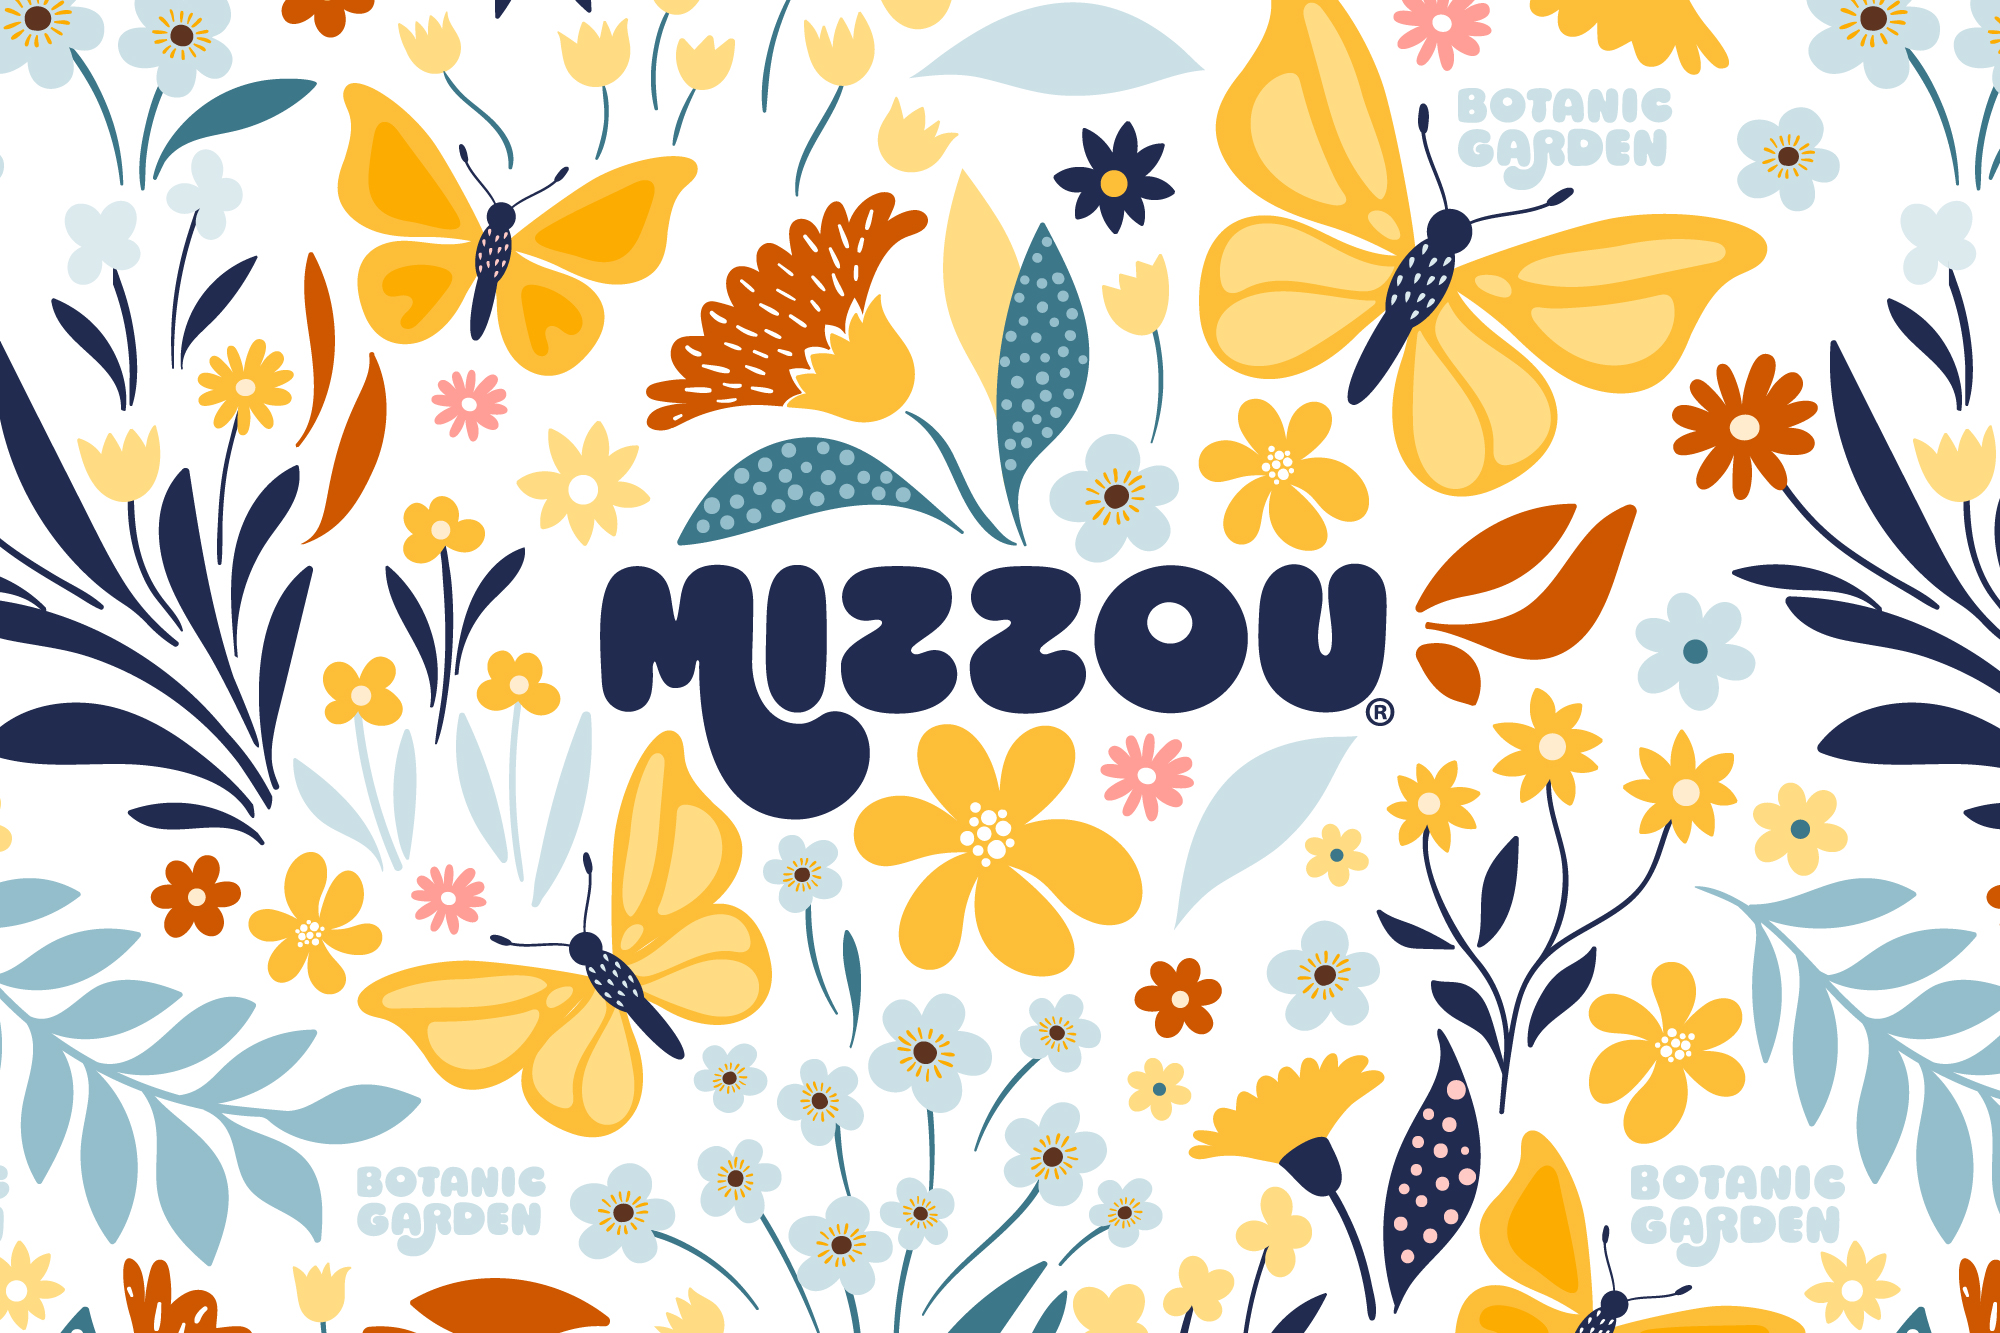 colorful graphic pattern from the mizzou botanic garden line. features butterflies, plants and more